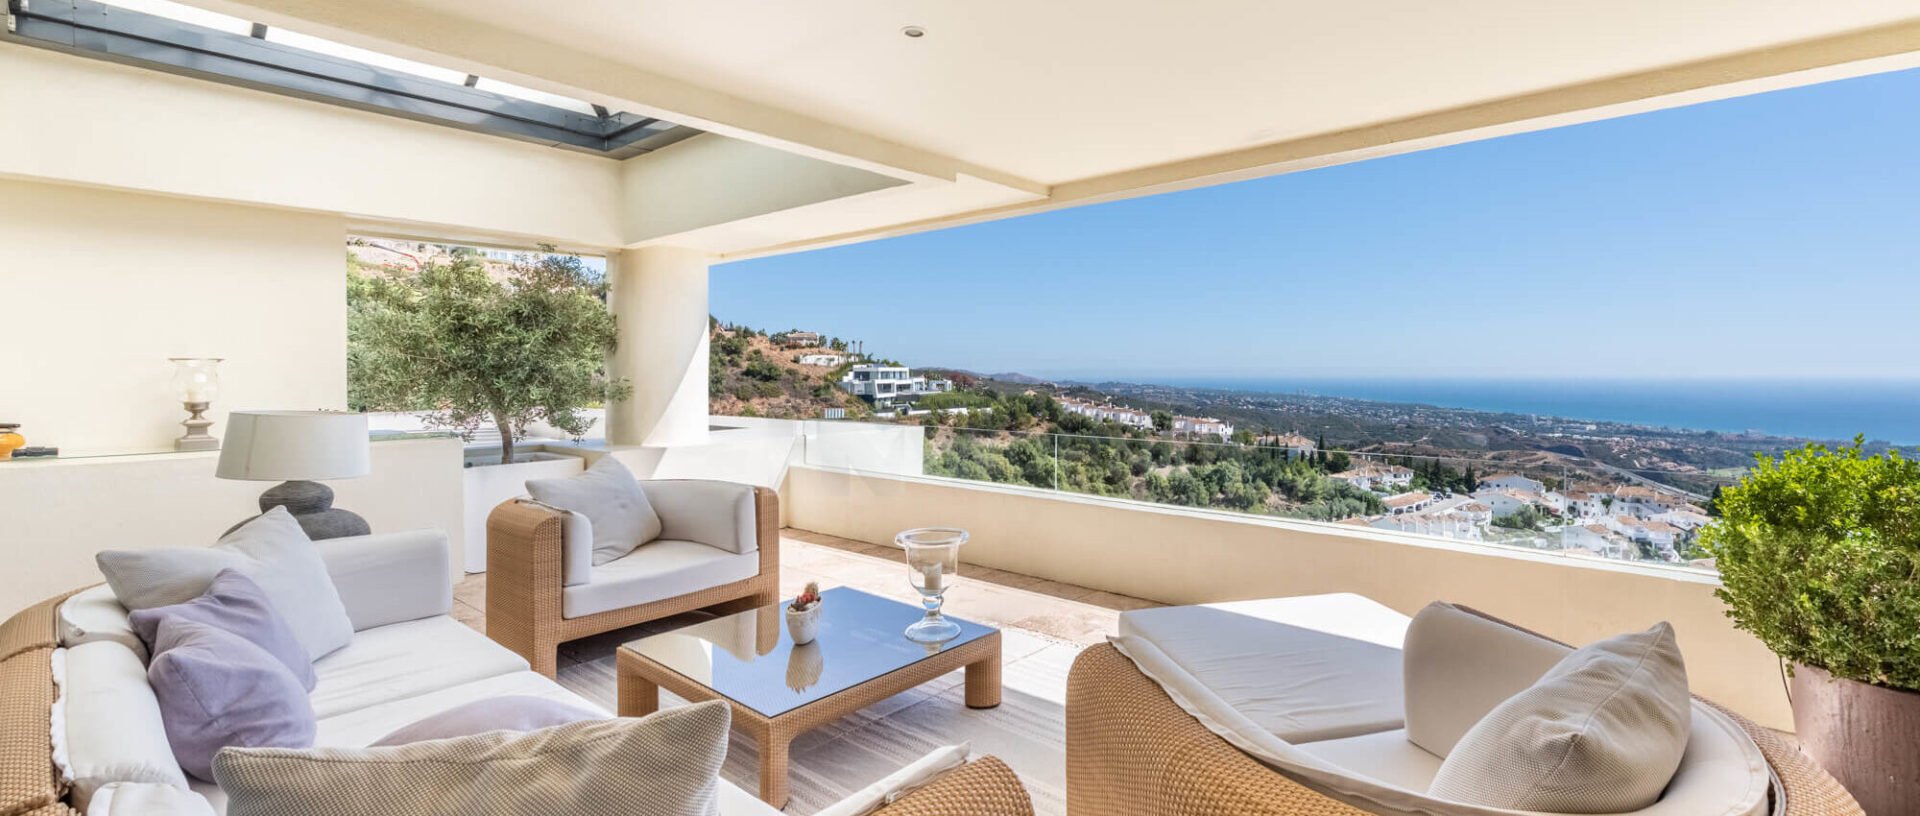 Impressive duplex penthouse with seaviews in Los Monteros Hill Club